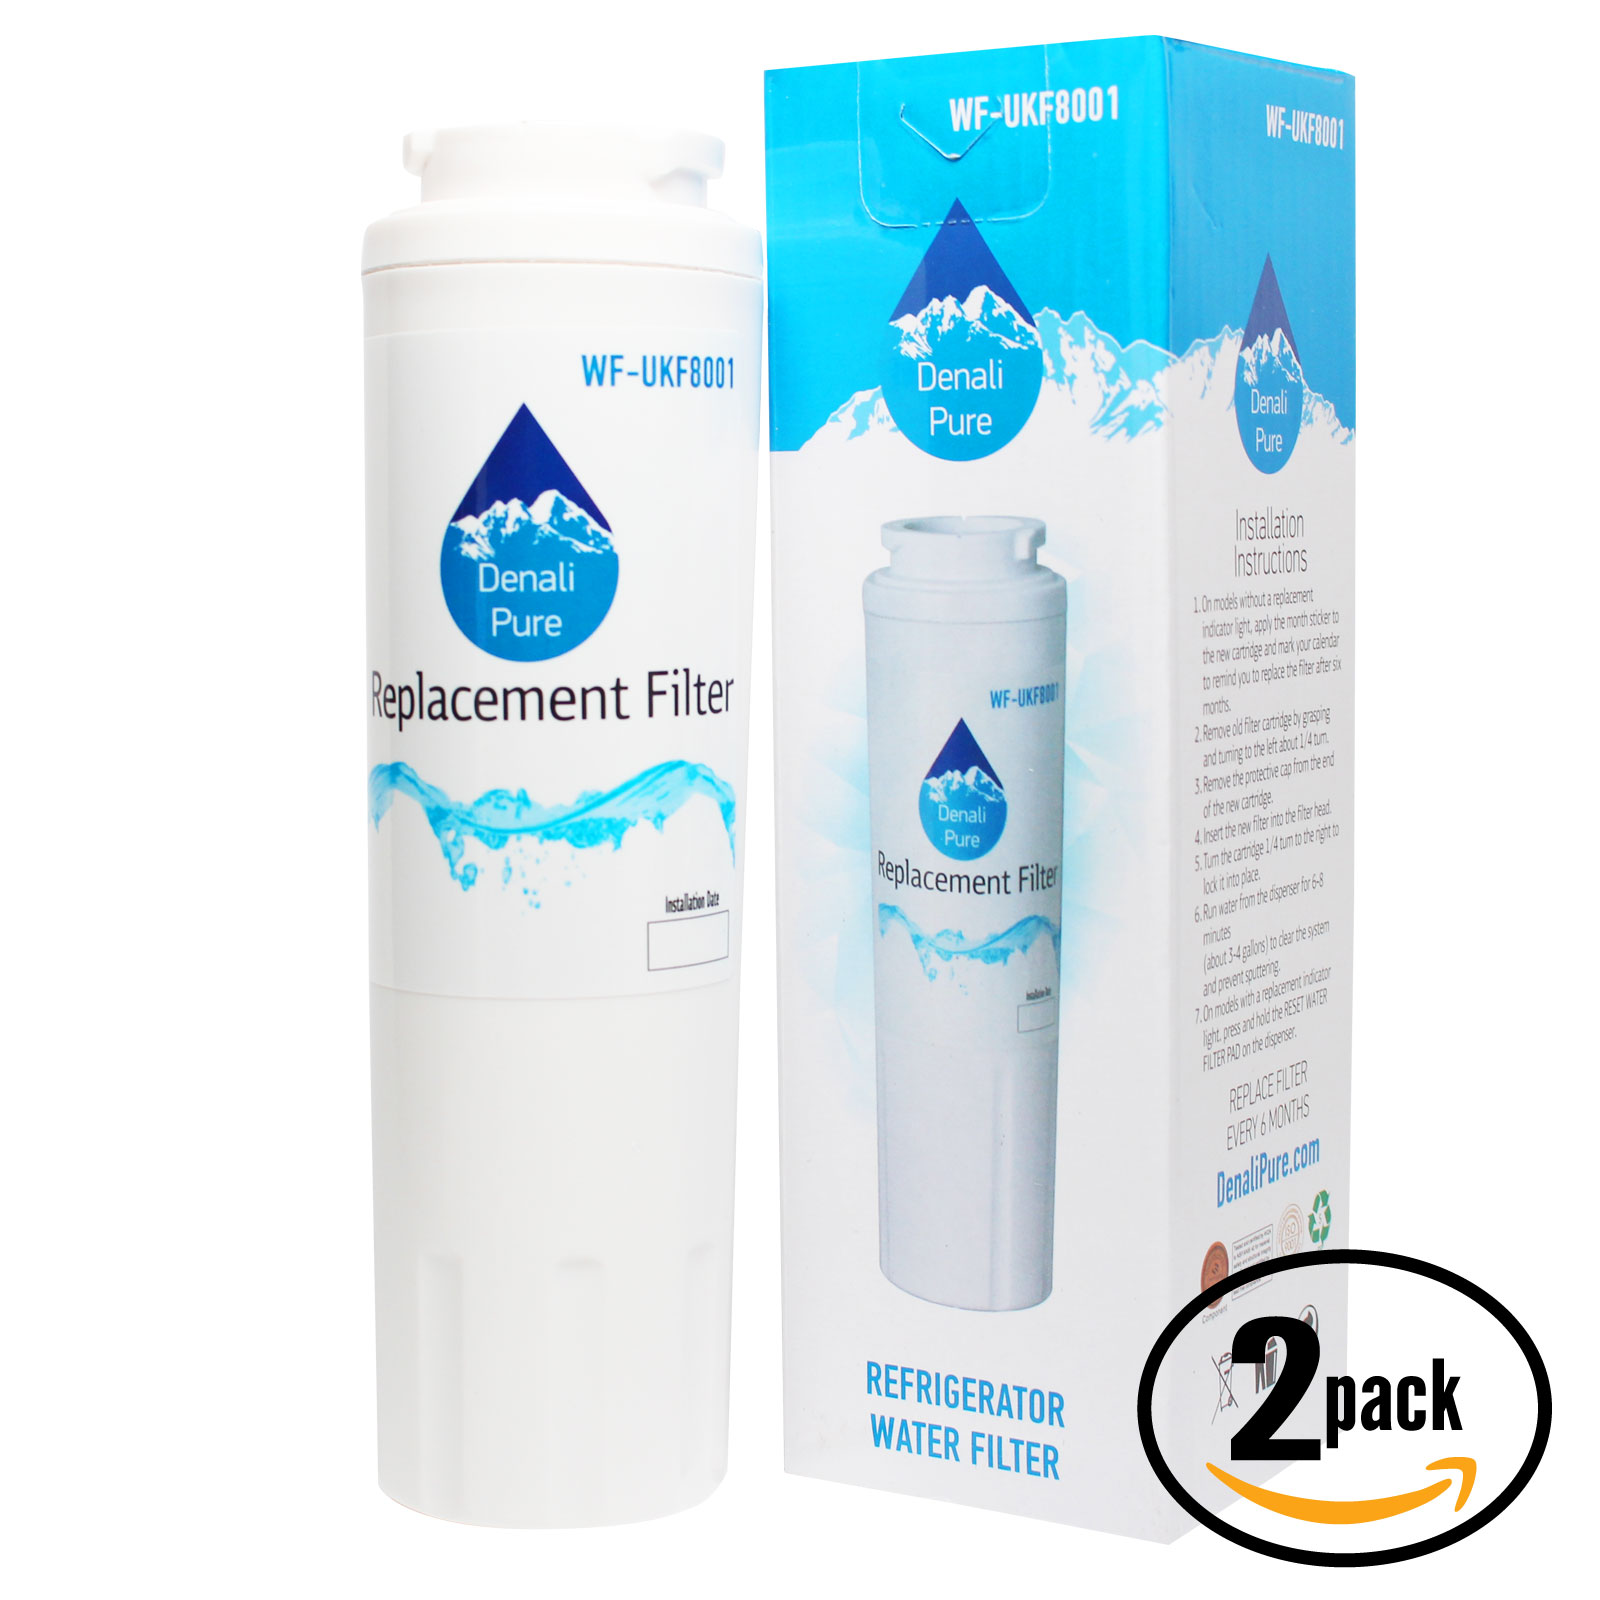 2-Pack Replacement for KitchenAid KFCS22EVMS4 Refrigerator Water Filter - Compatible with KitchenAid 4396395 Fridge Water Filter Cartridge - image 1 of 4